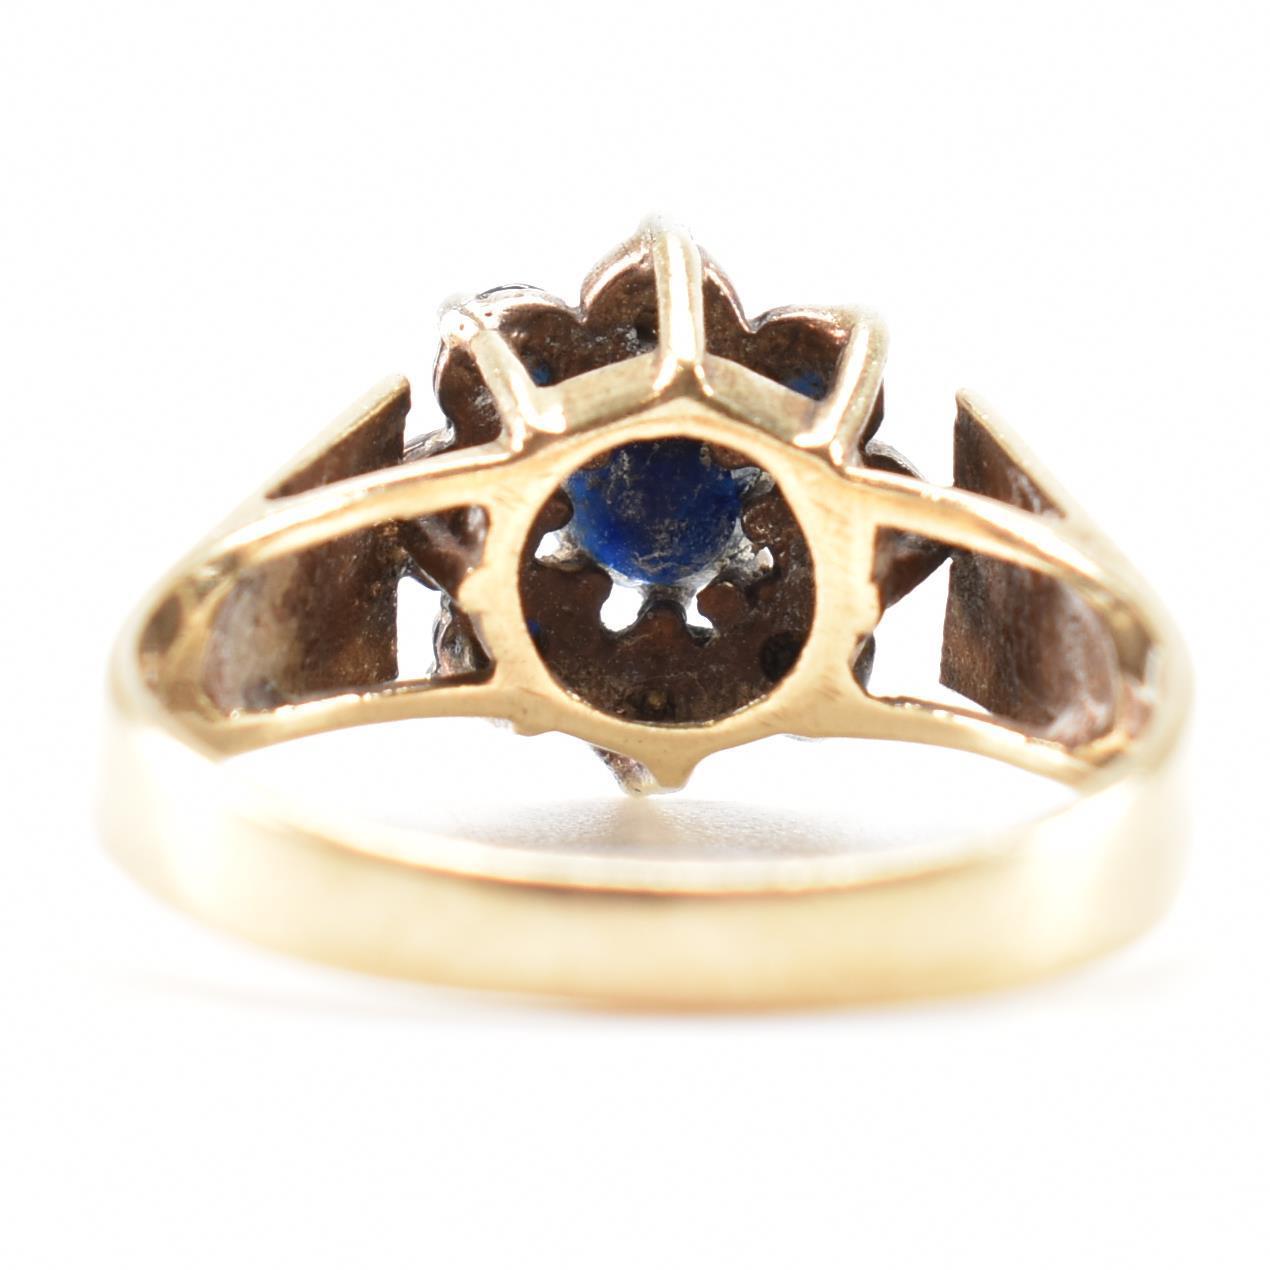 HALLMARKED 9CT GOLD SAPPHIRE & DIAMOND CLUSTER RING - Image 4 of 10